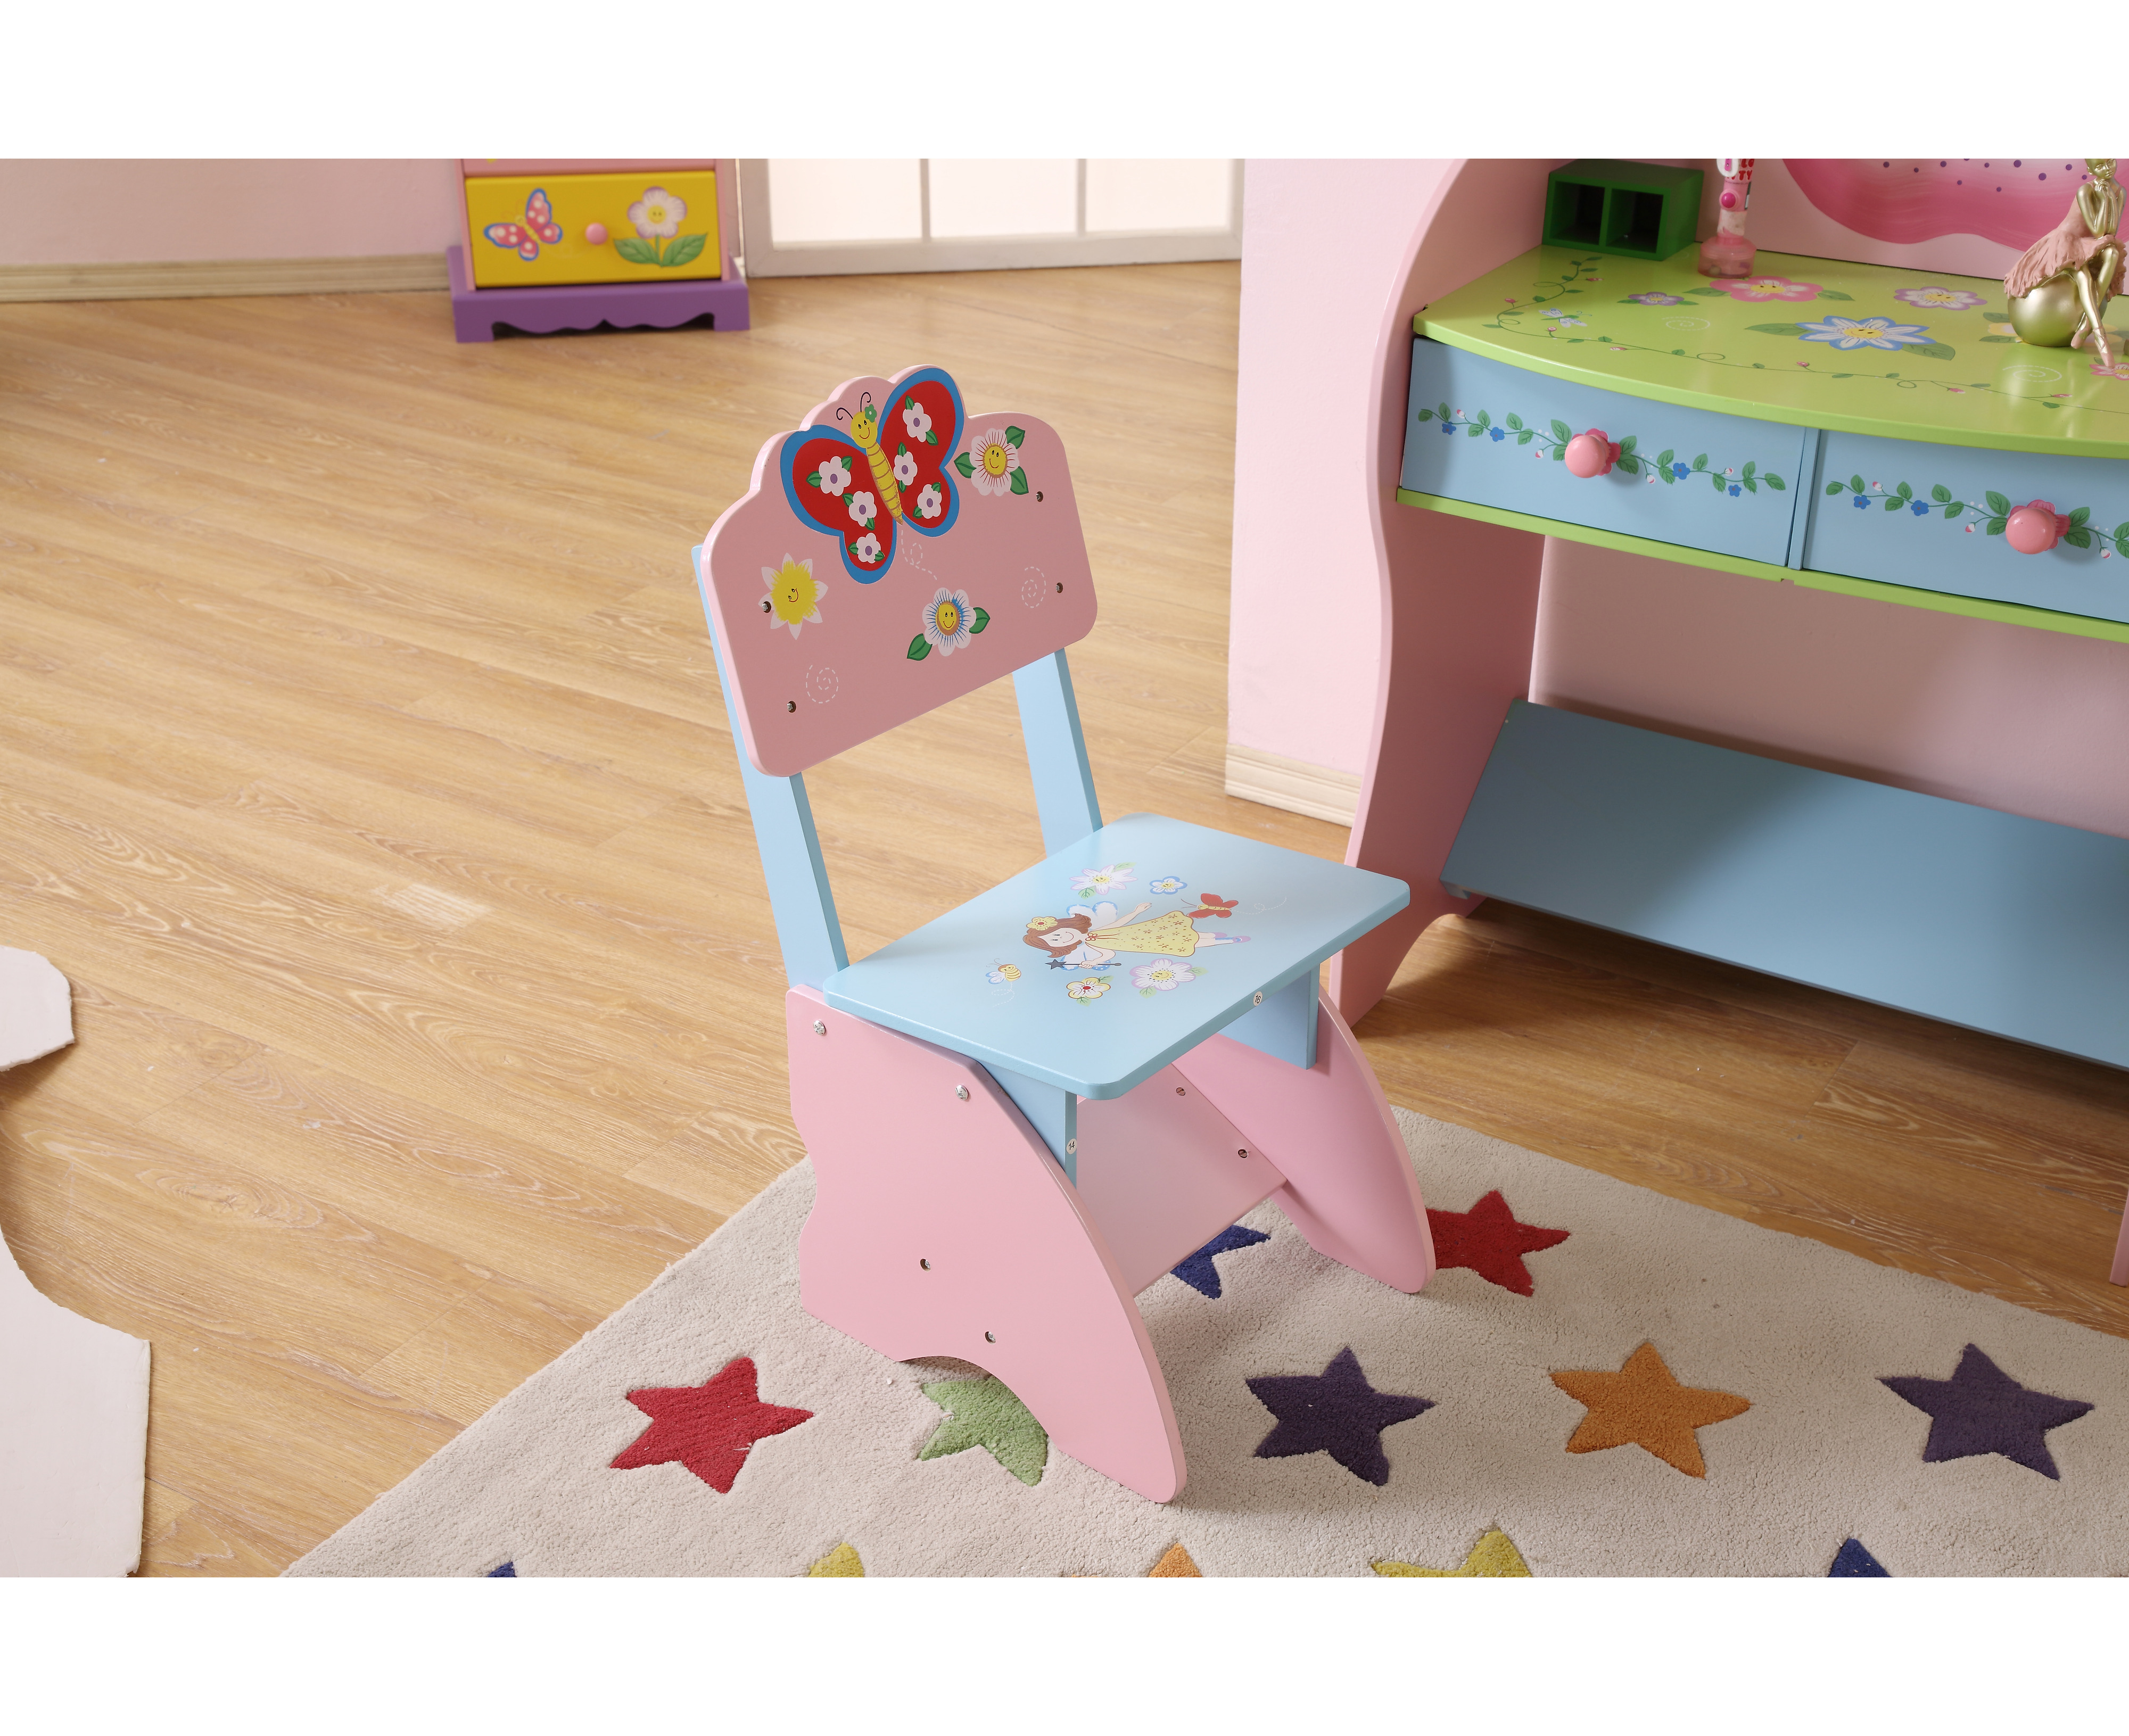 girls dressing table and chair